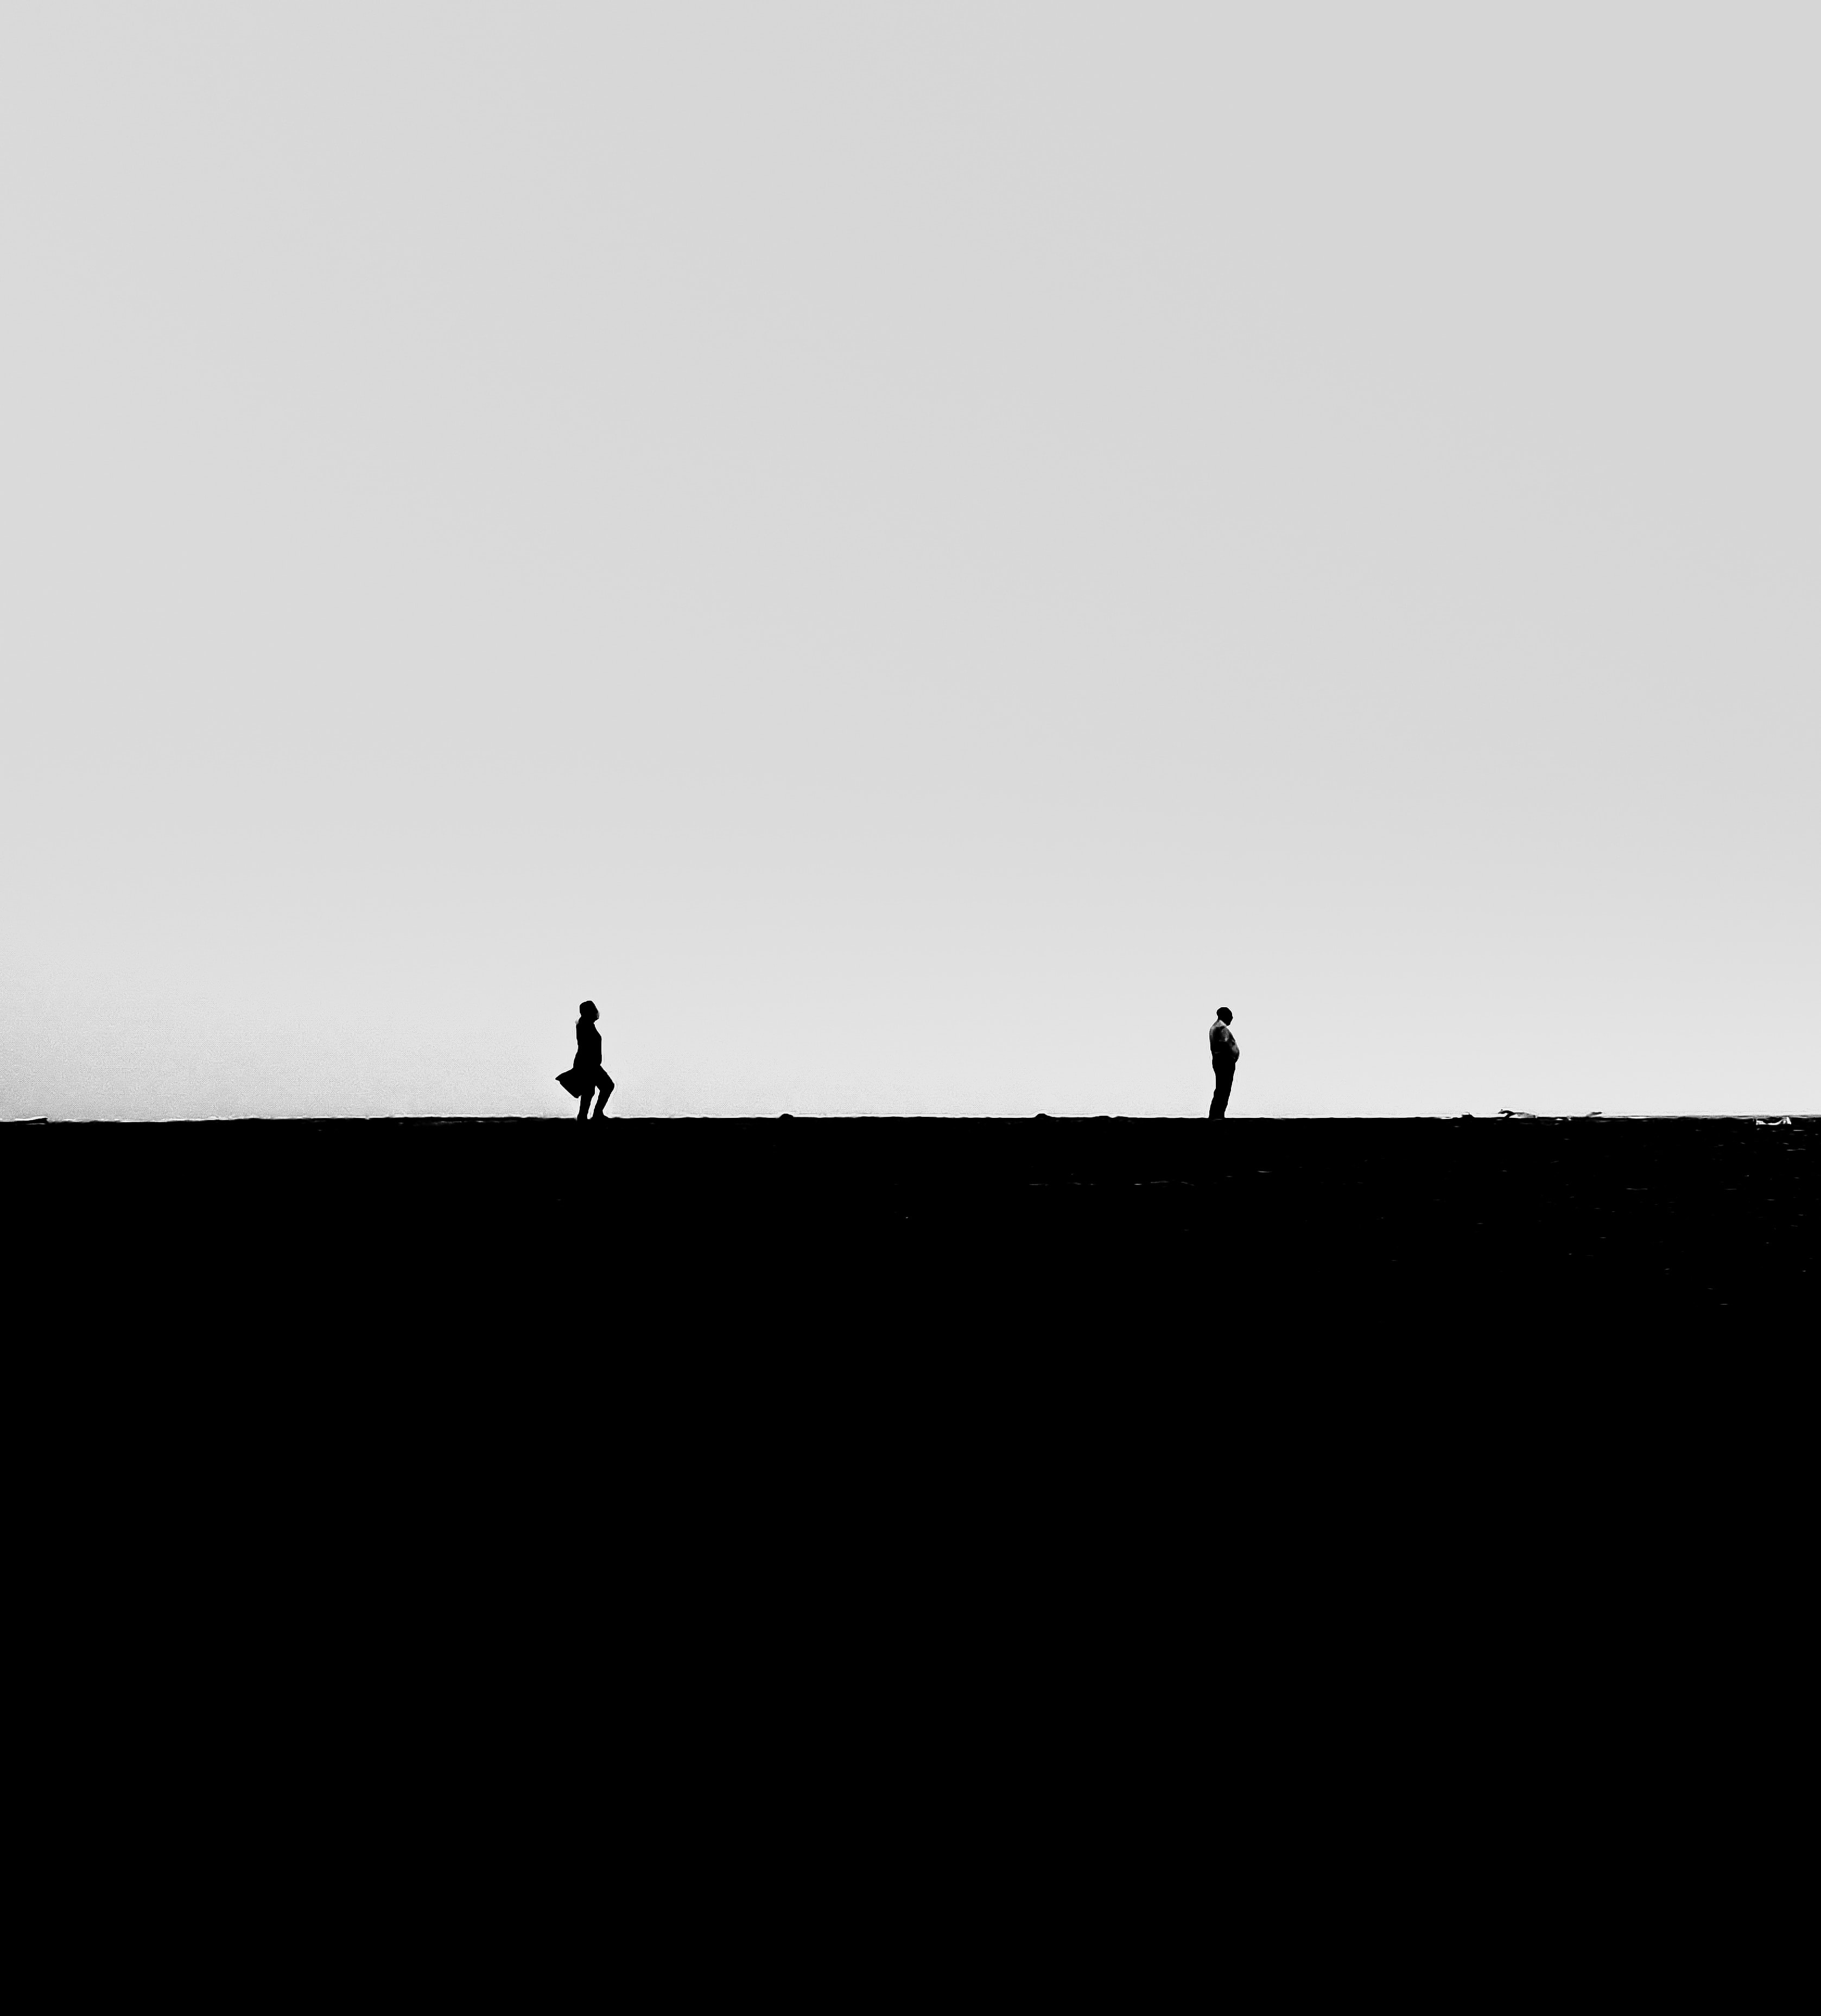 black and white, chb, people, silhouettes, minimalism, bw